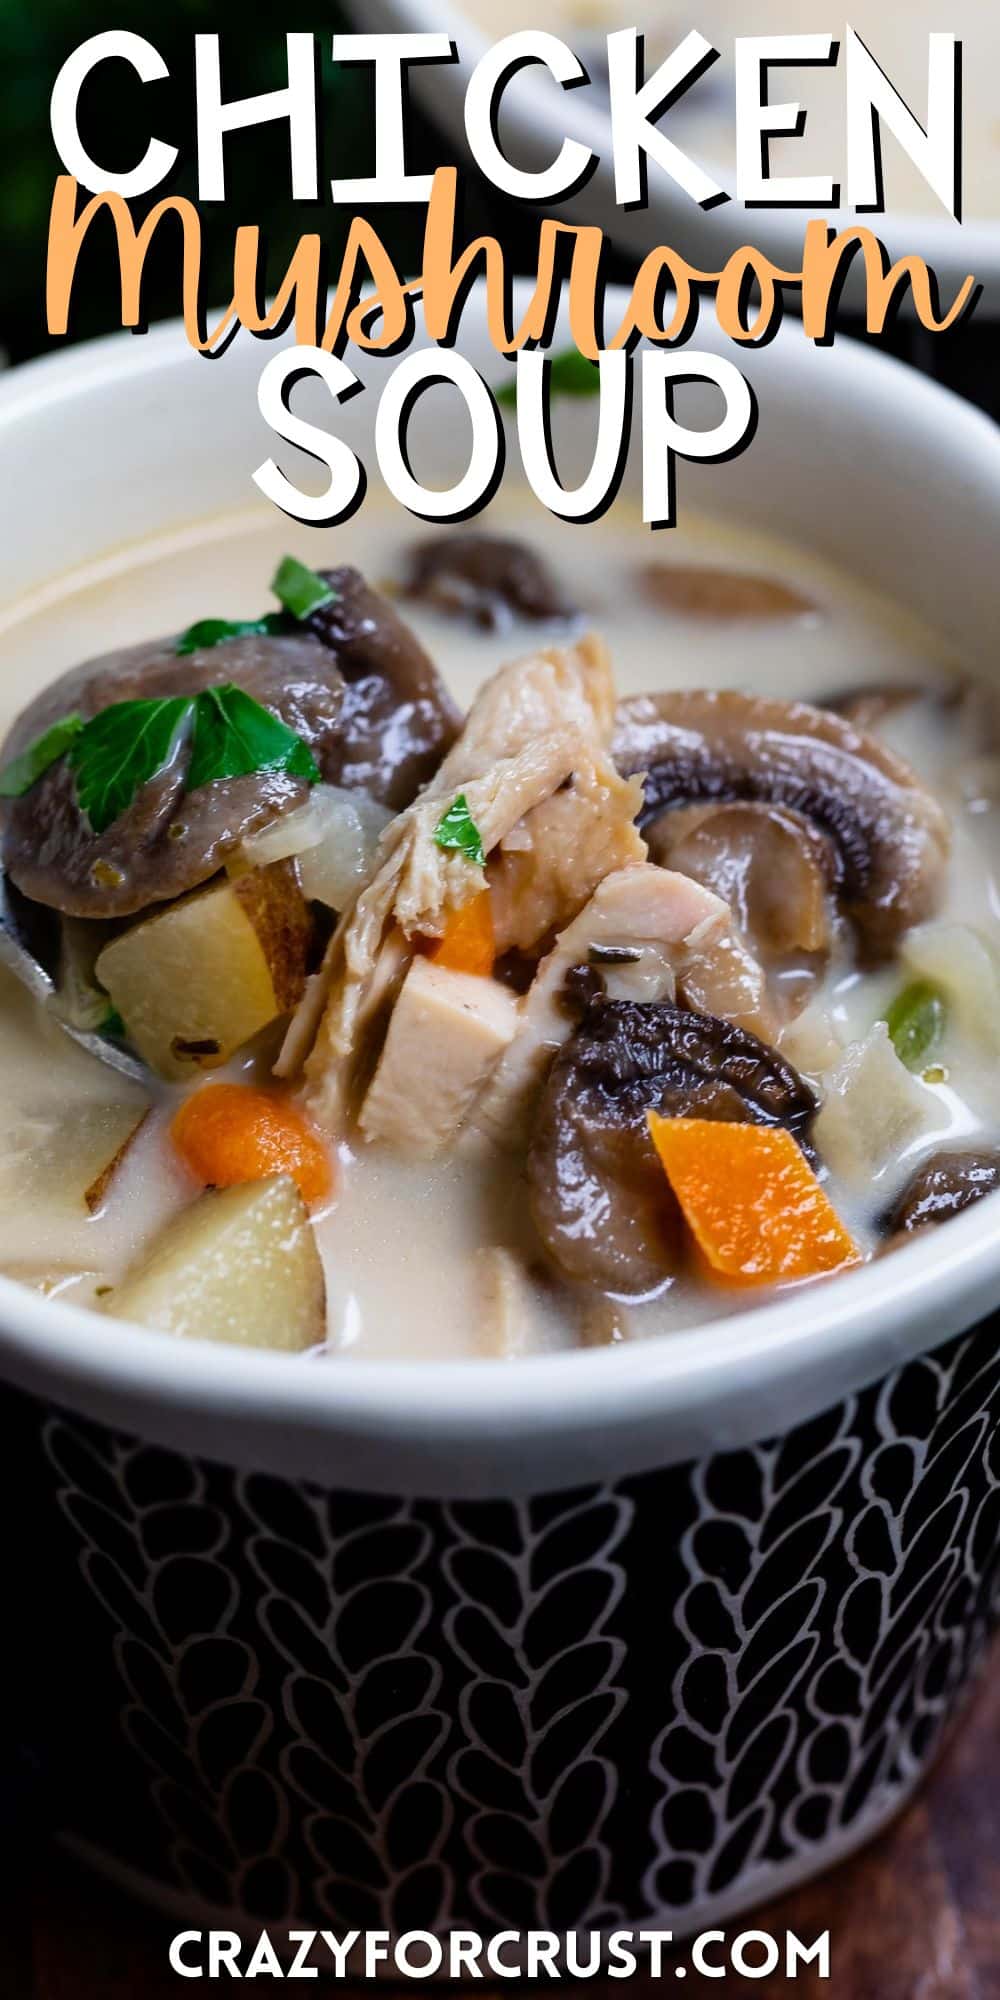 soup with mushrooms in it in a dark blue bowl with a spoon inside with words on the image.